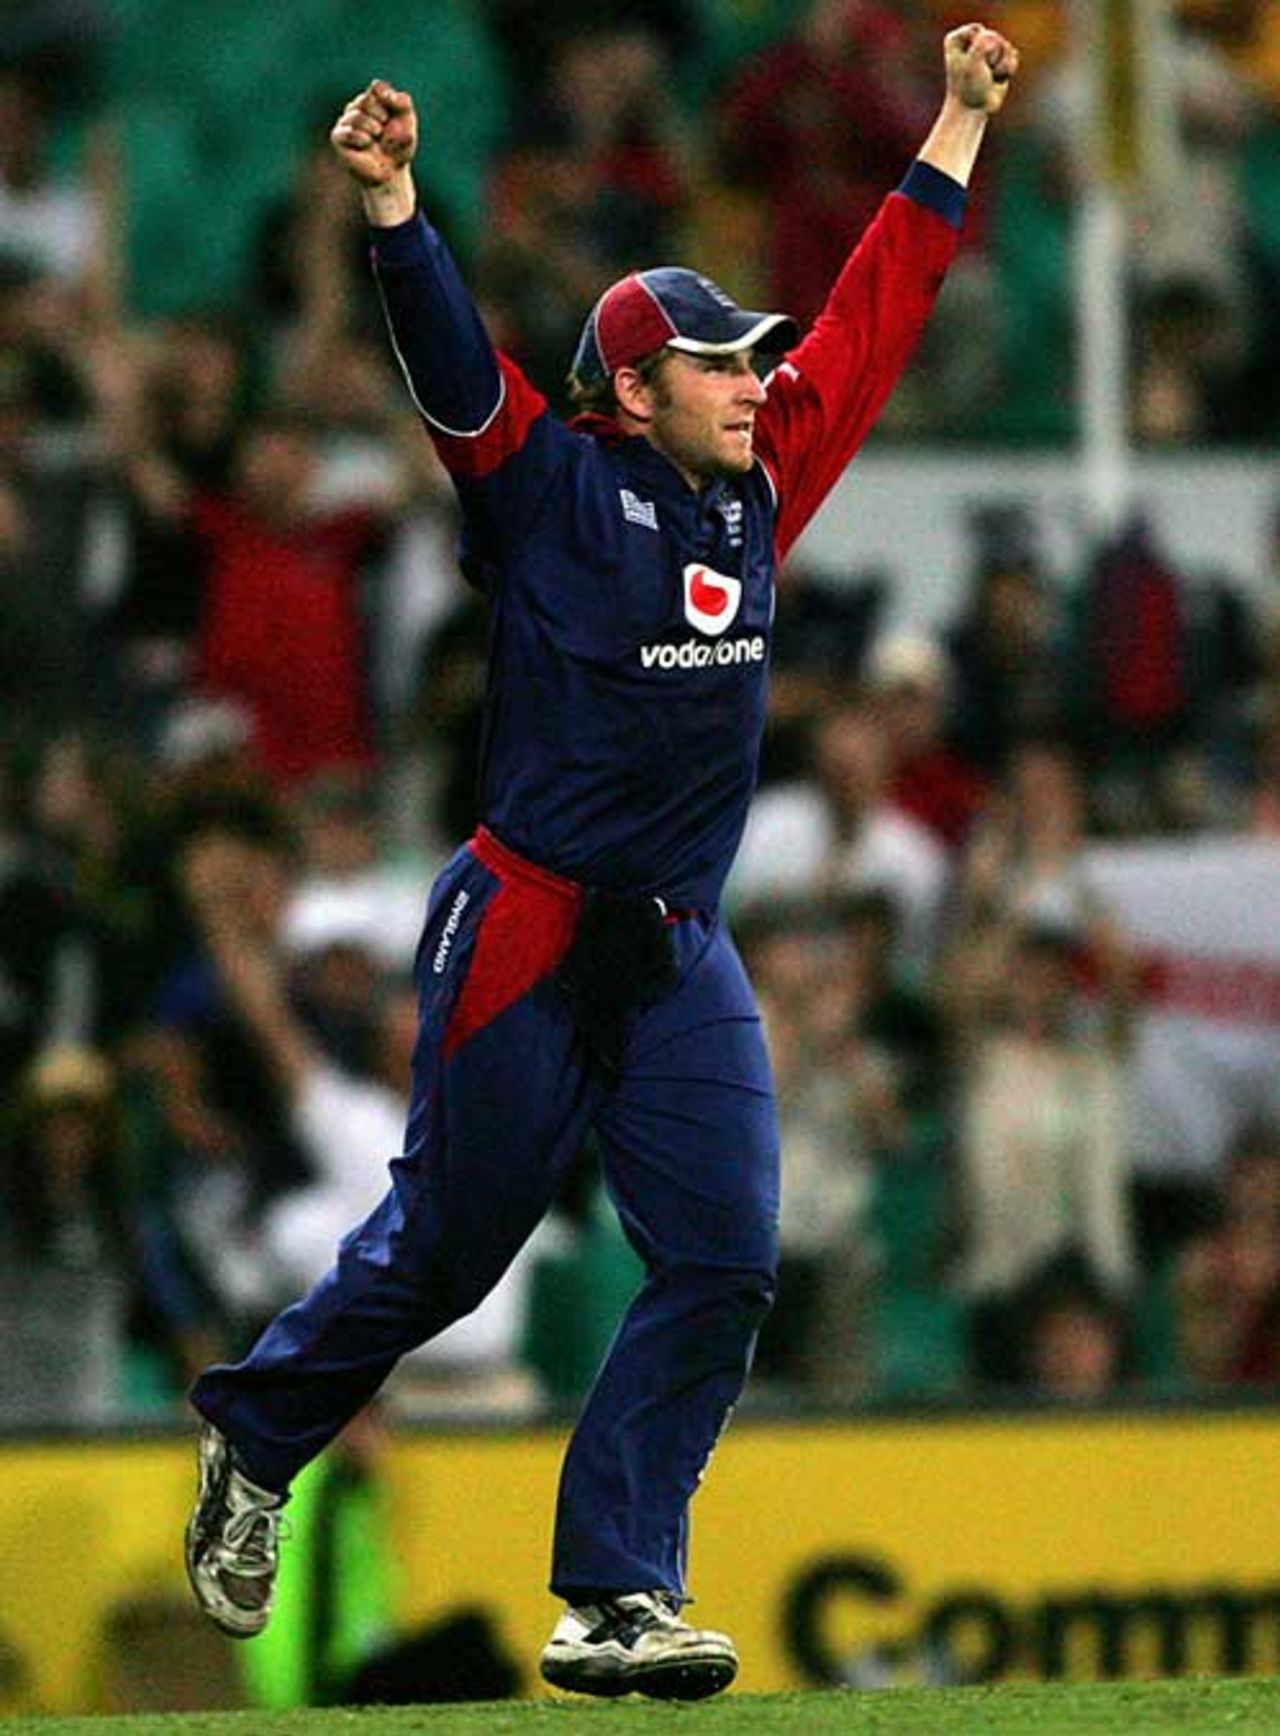 Jamie Dalrymple, arms aloft, after his stunning catch, Australia v England, CB Series, 2nd final, Sydney, February 11, 2007